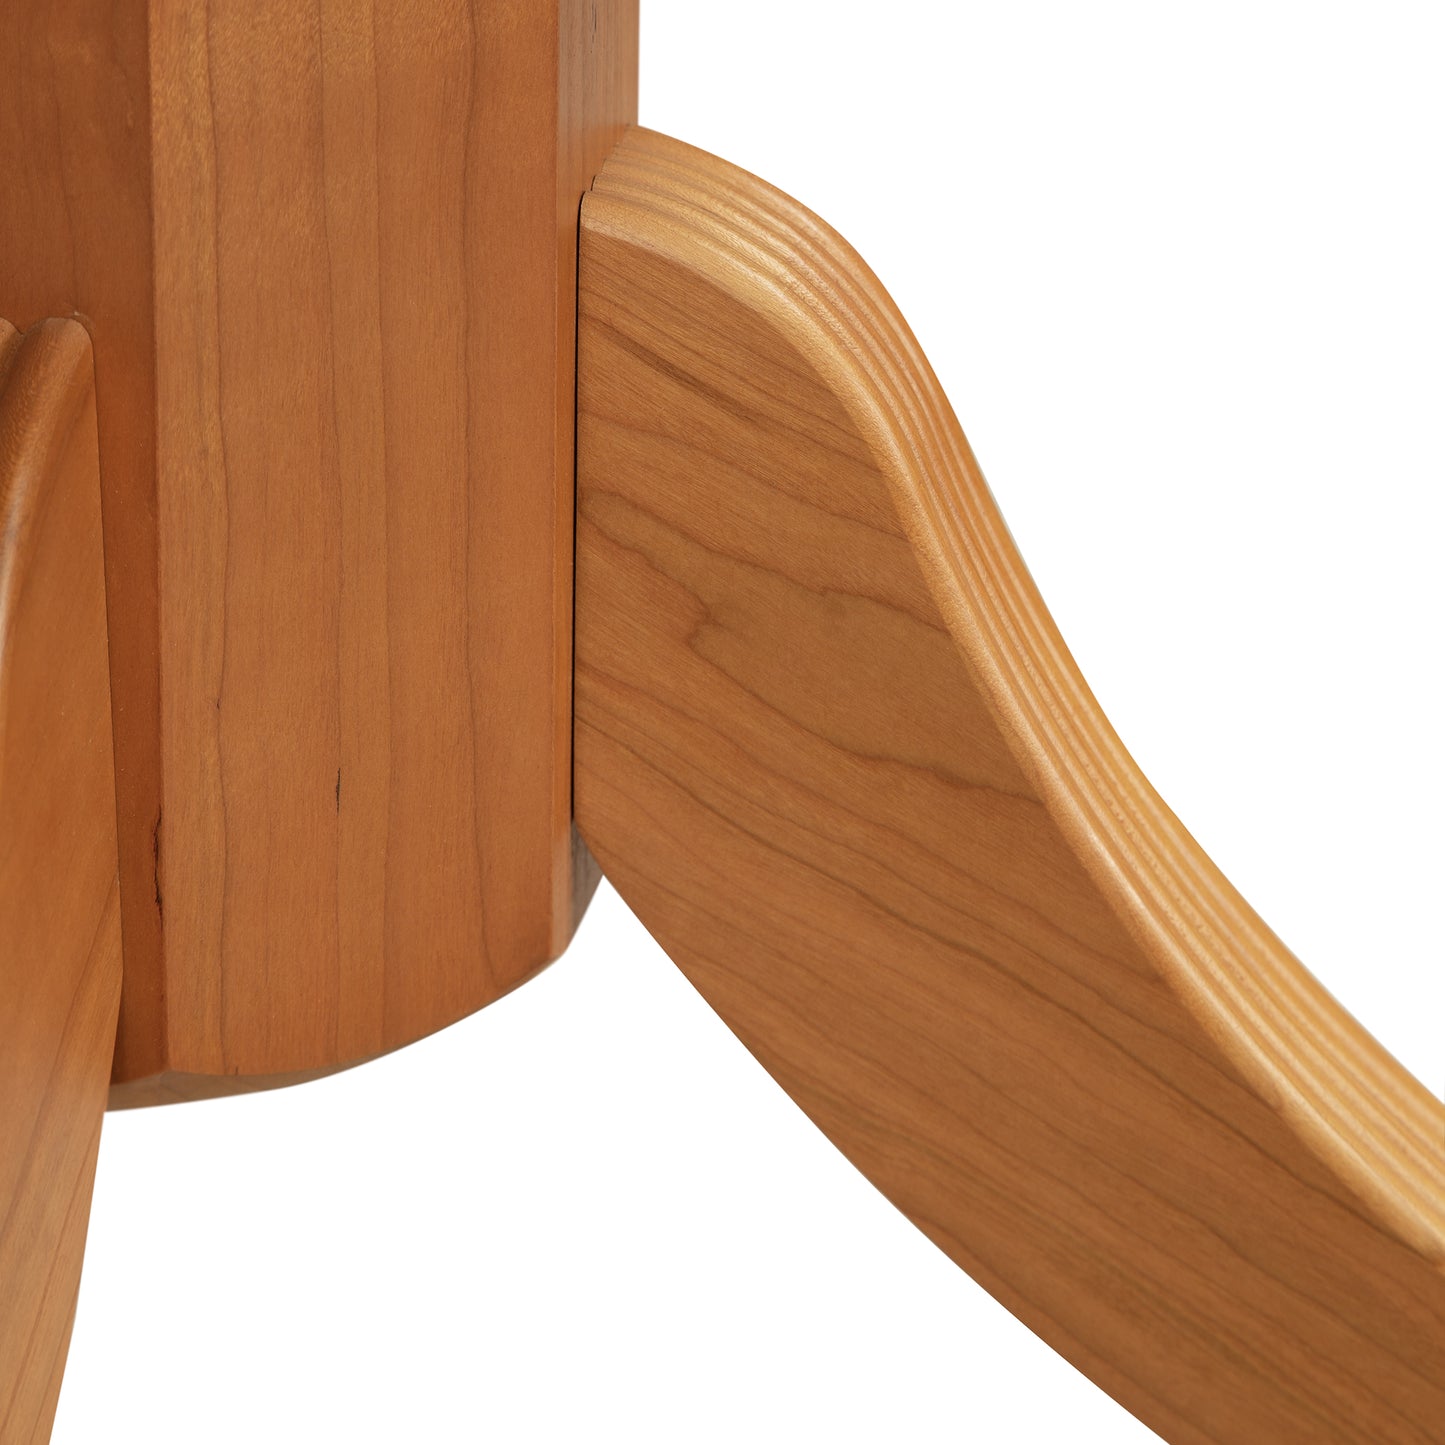 A close up of the legs of a Lyndon Furniture Duncan-Phyfe Round Pedestal Dining Table.